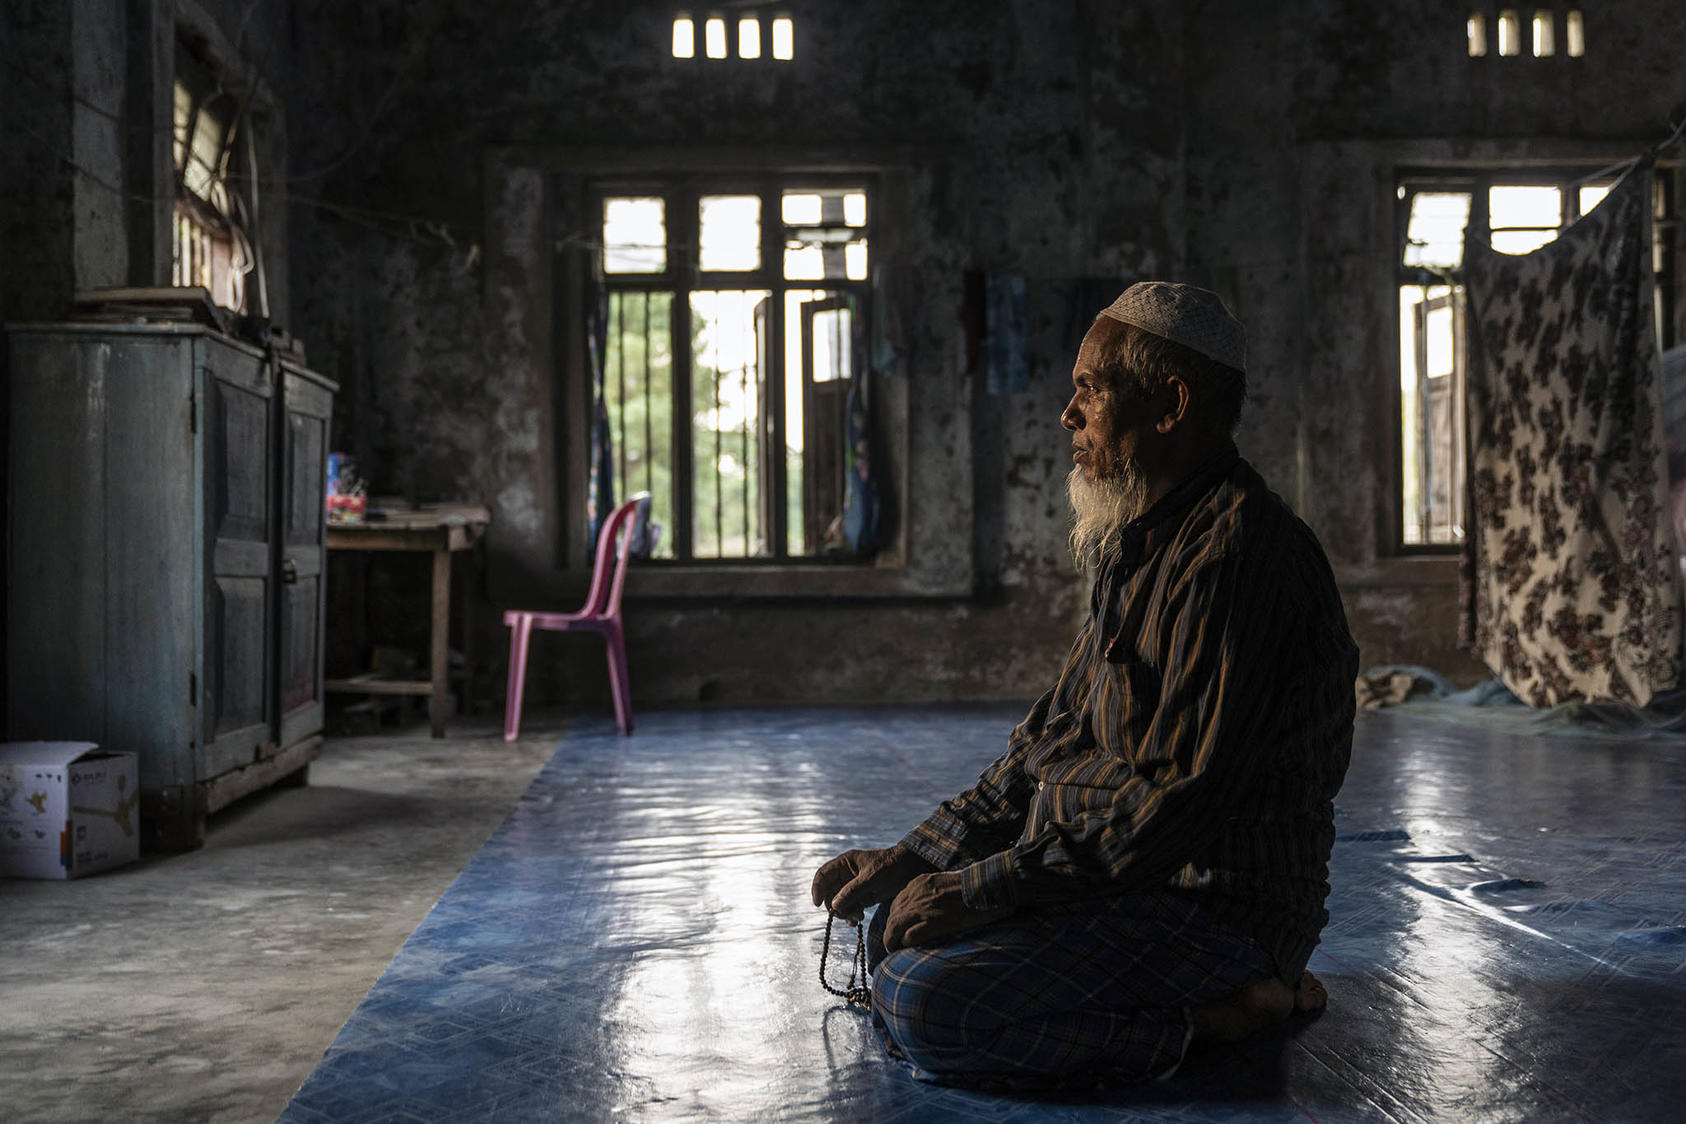 A Rohingya Muslim man prays in one of the few undamaged mosques in Ngan Chaung in northern Rakhine State, Myanmar, on May 29, 2019. (Photo by Adam Dean/New York Times)